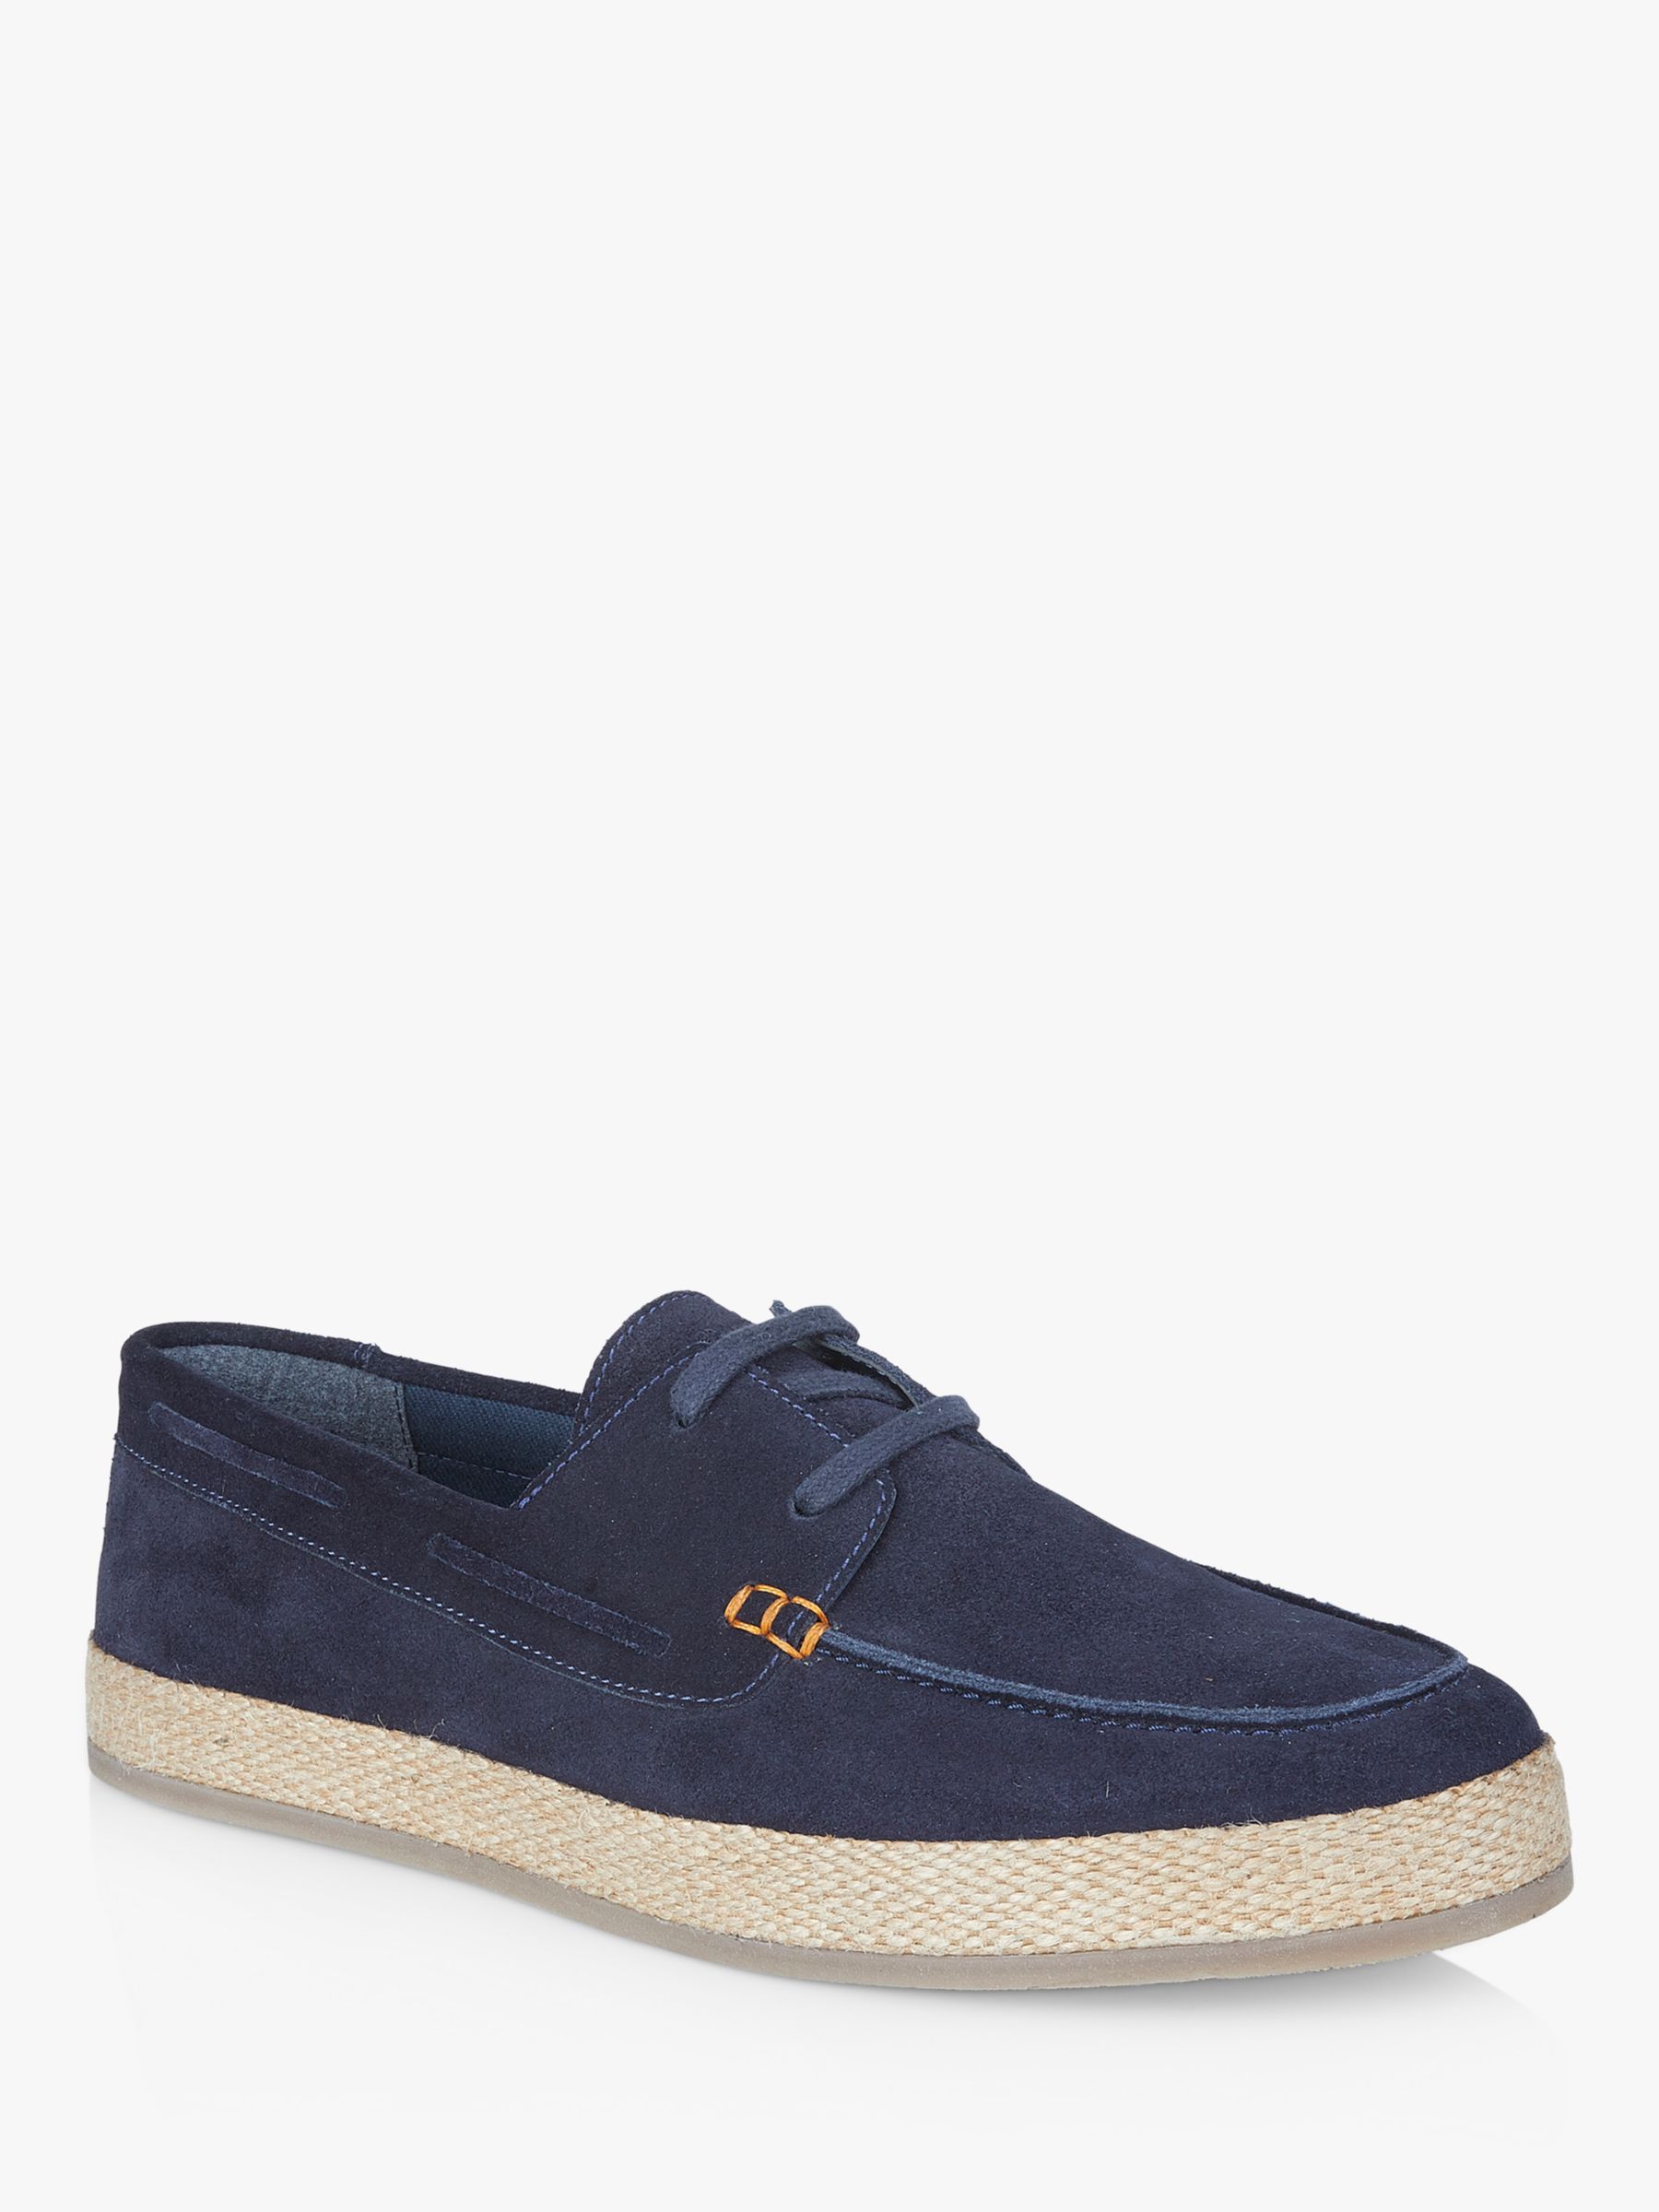 Buy Silver Street London Northolt Suede Lace Up Moccasin Shoes Online at johnlewis.com